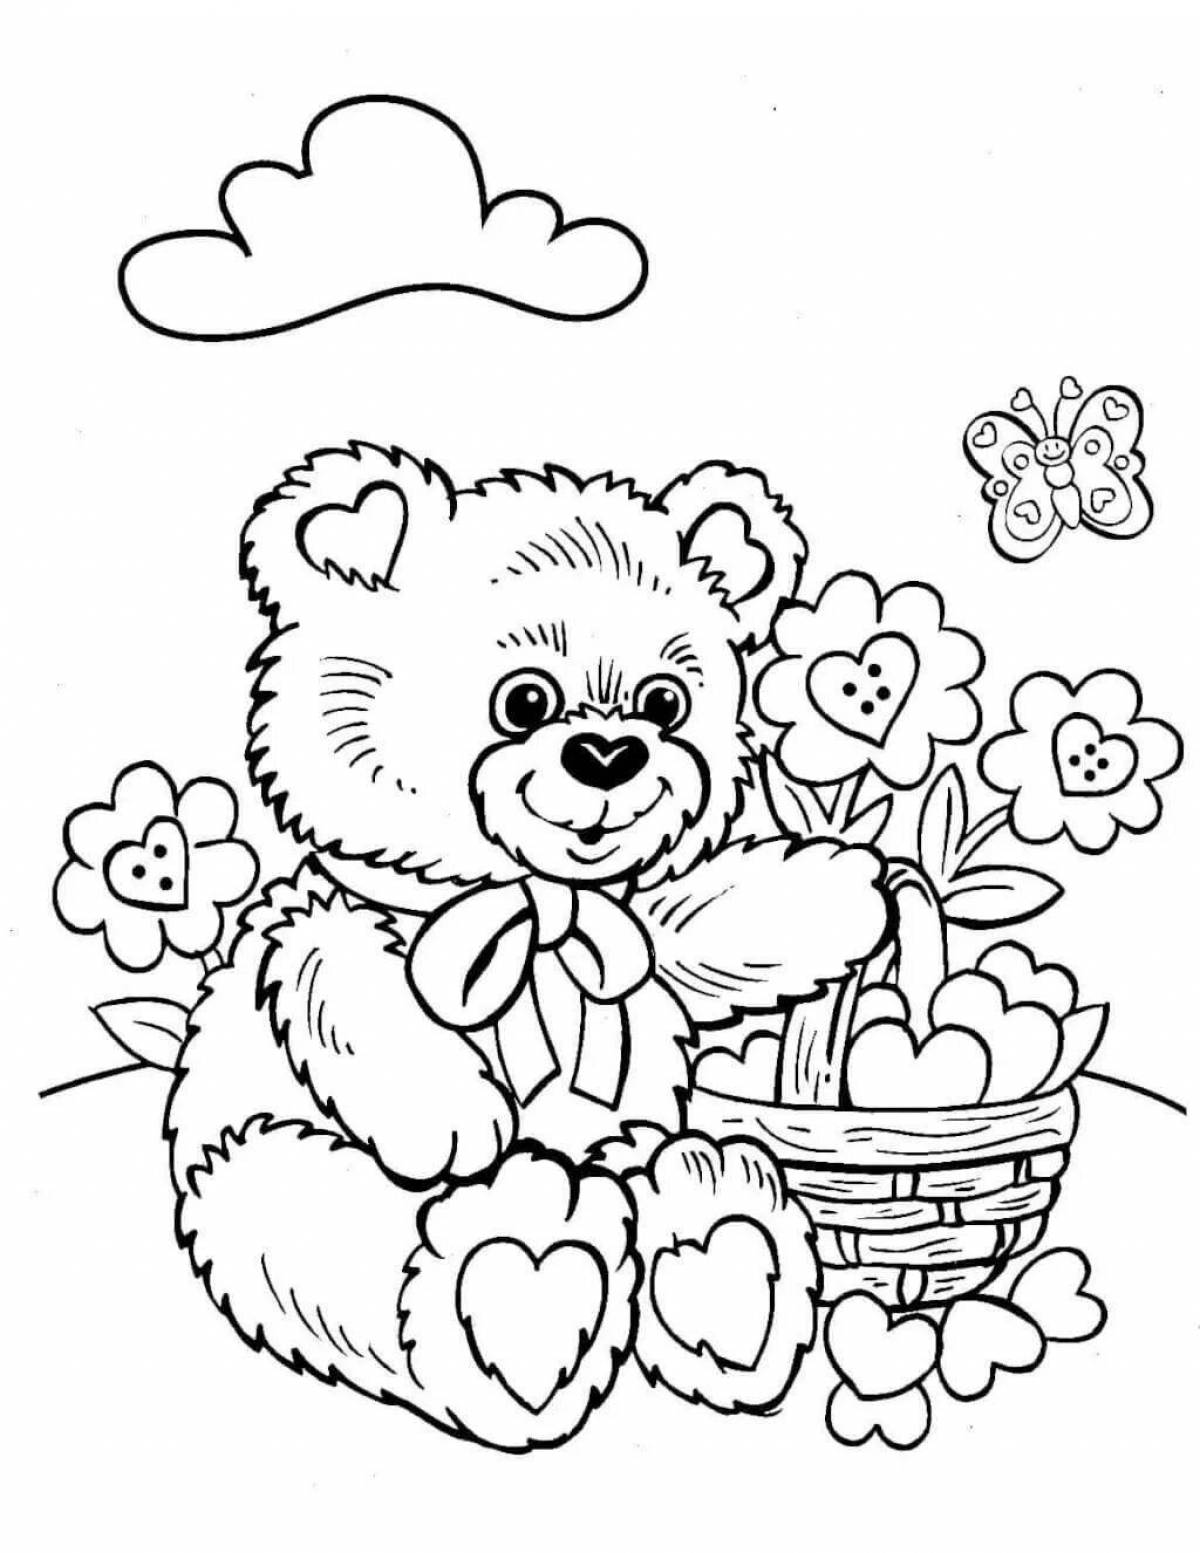 Fairy teddy bear coloring book for kids 5-6 years old